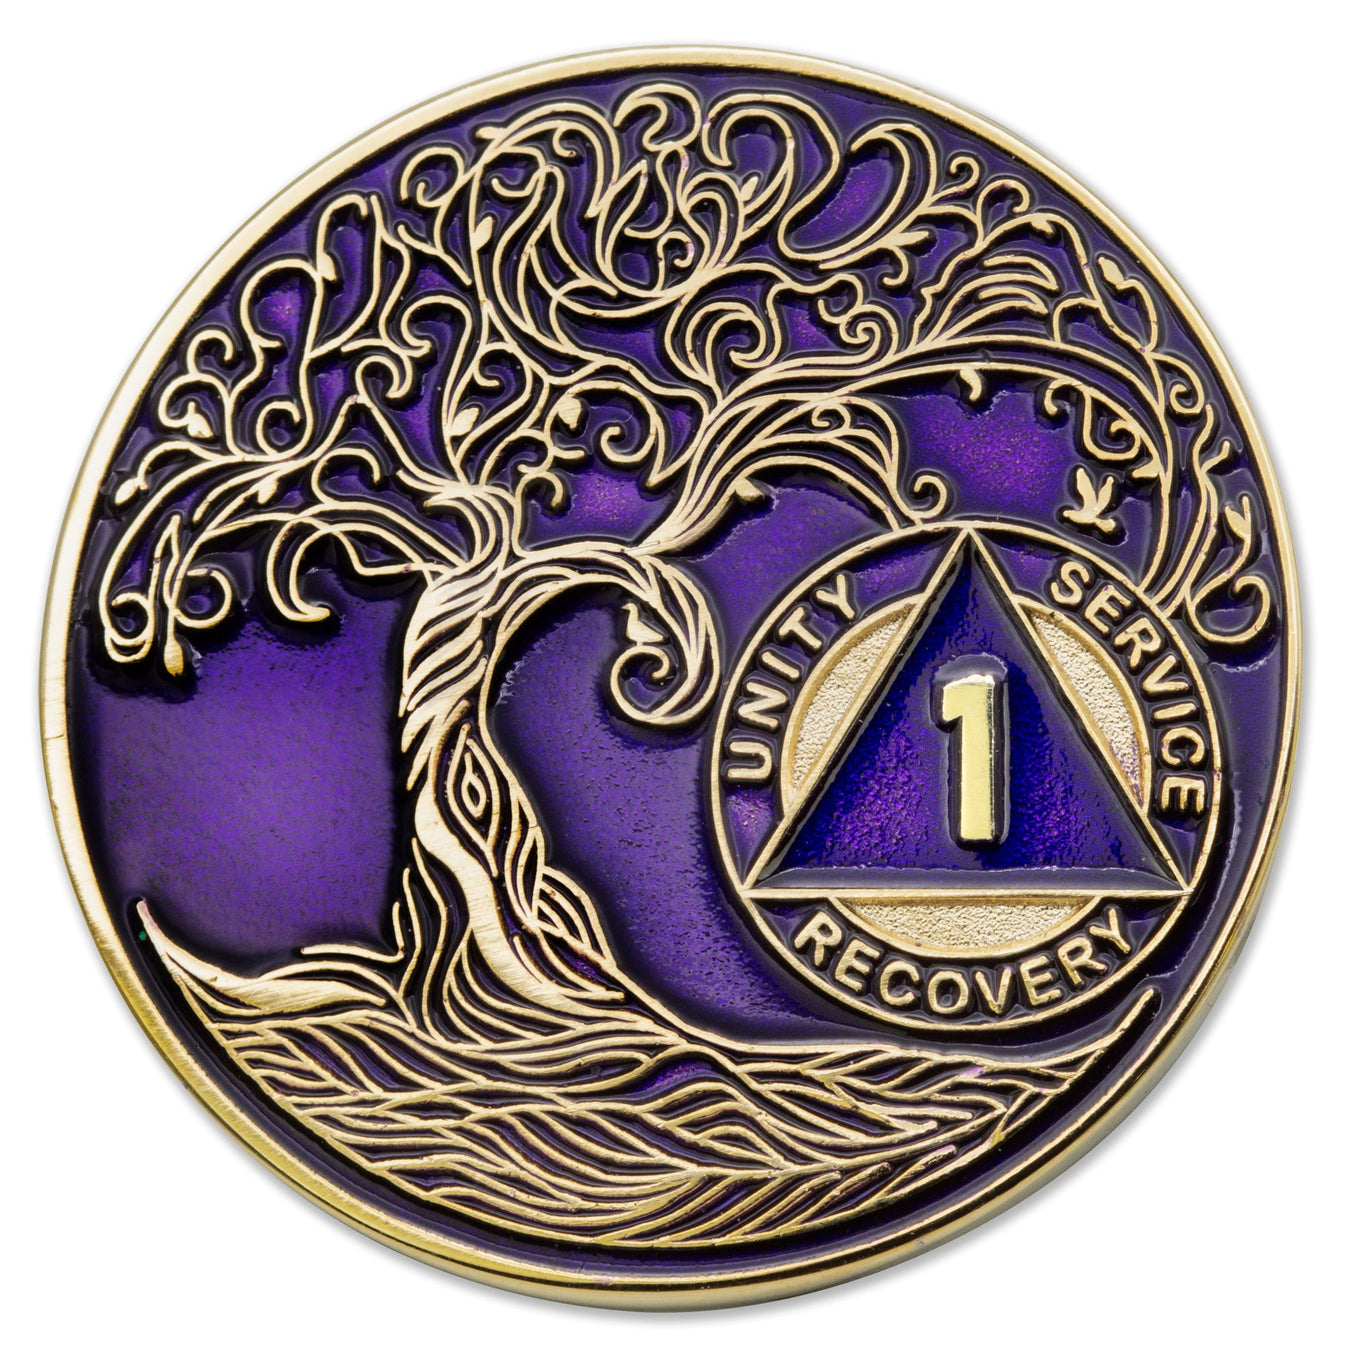 Tree of Life AA/NA Medallions - Sober Recovery Coins/Chips/Tokens